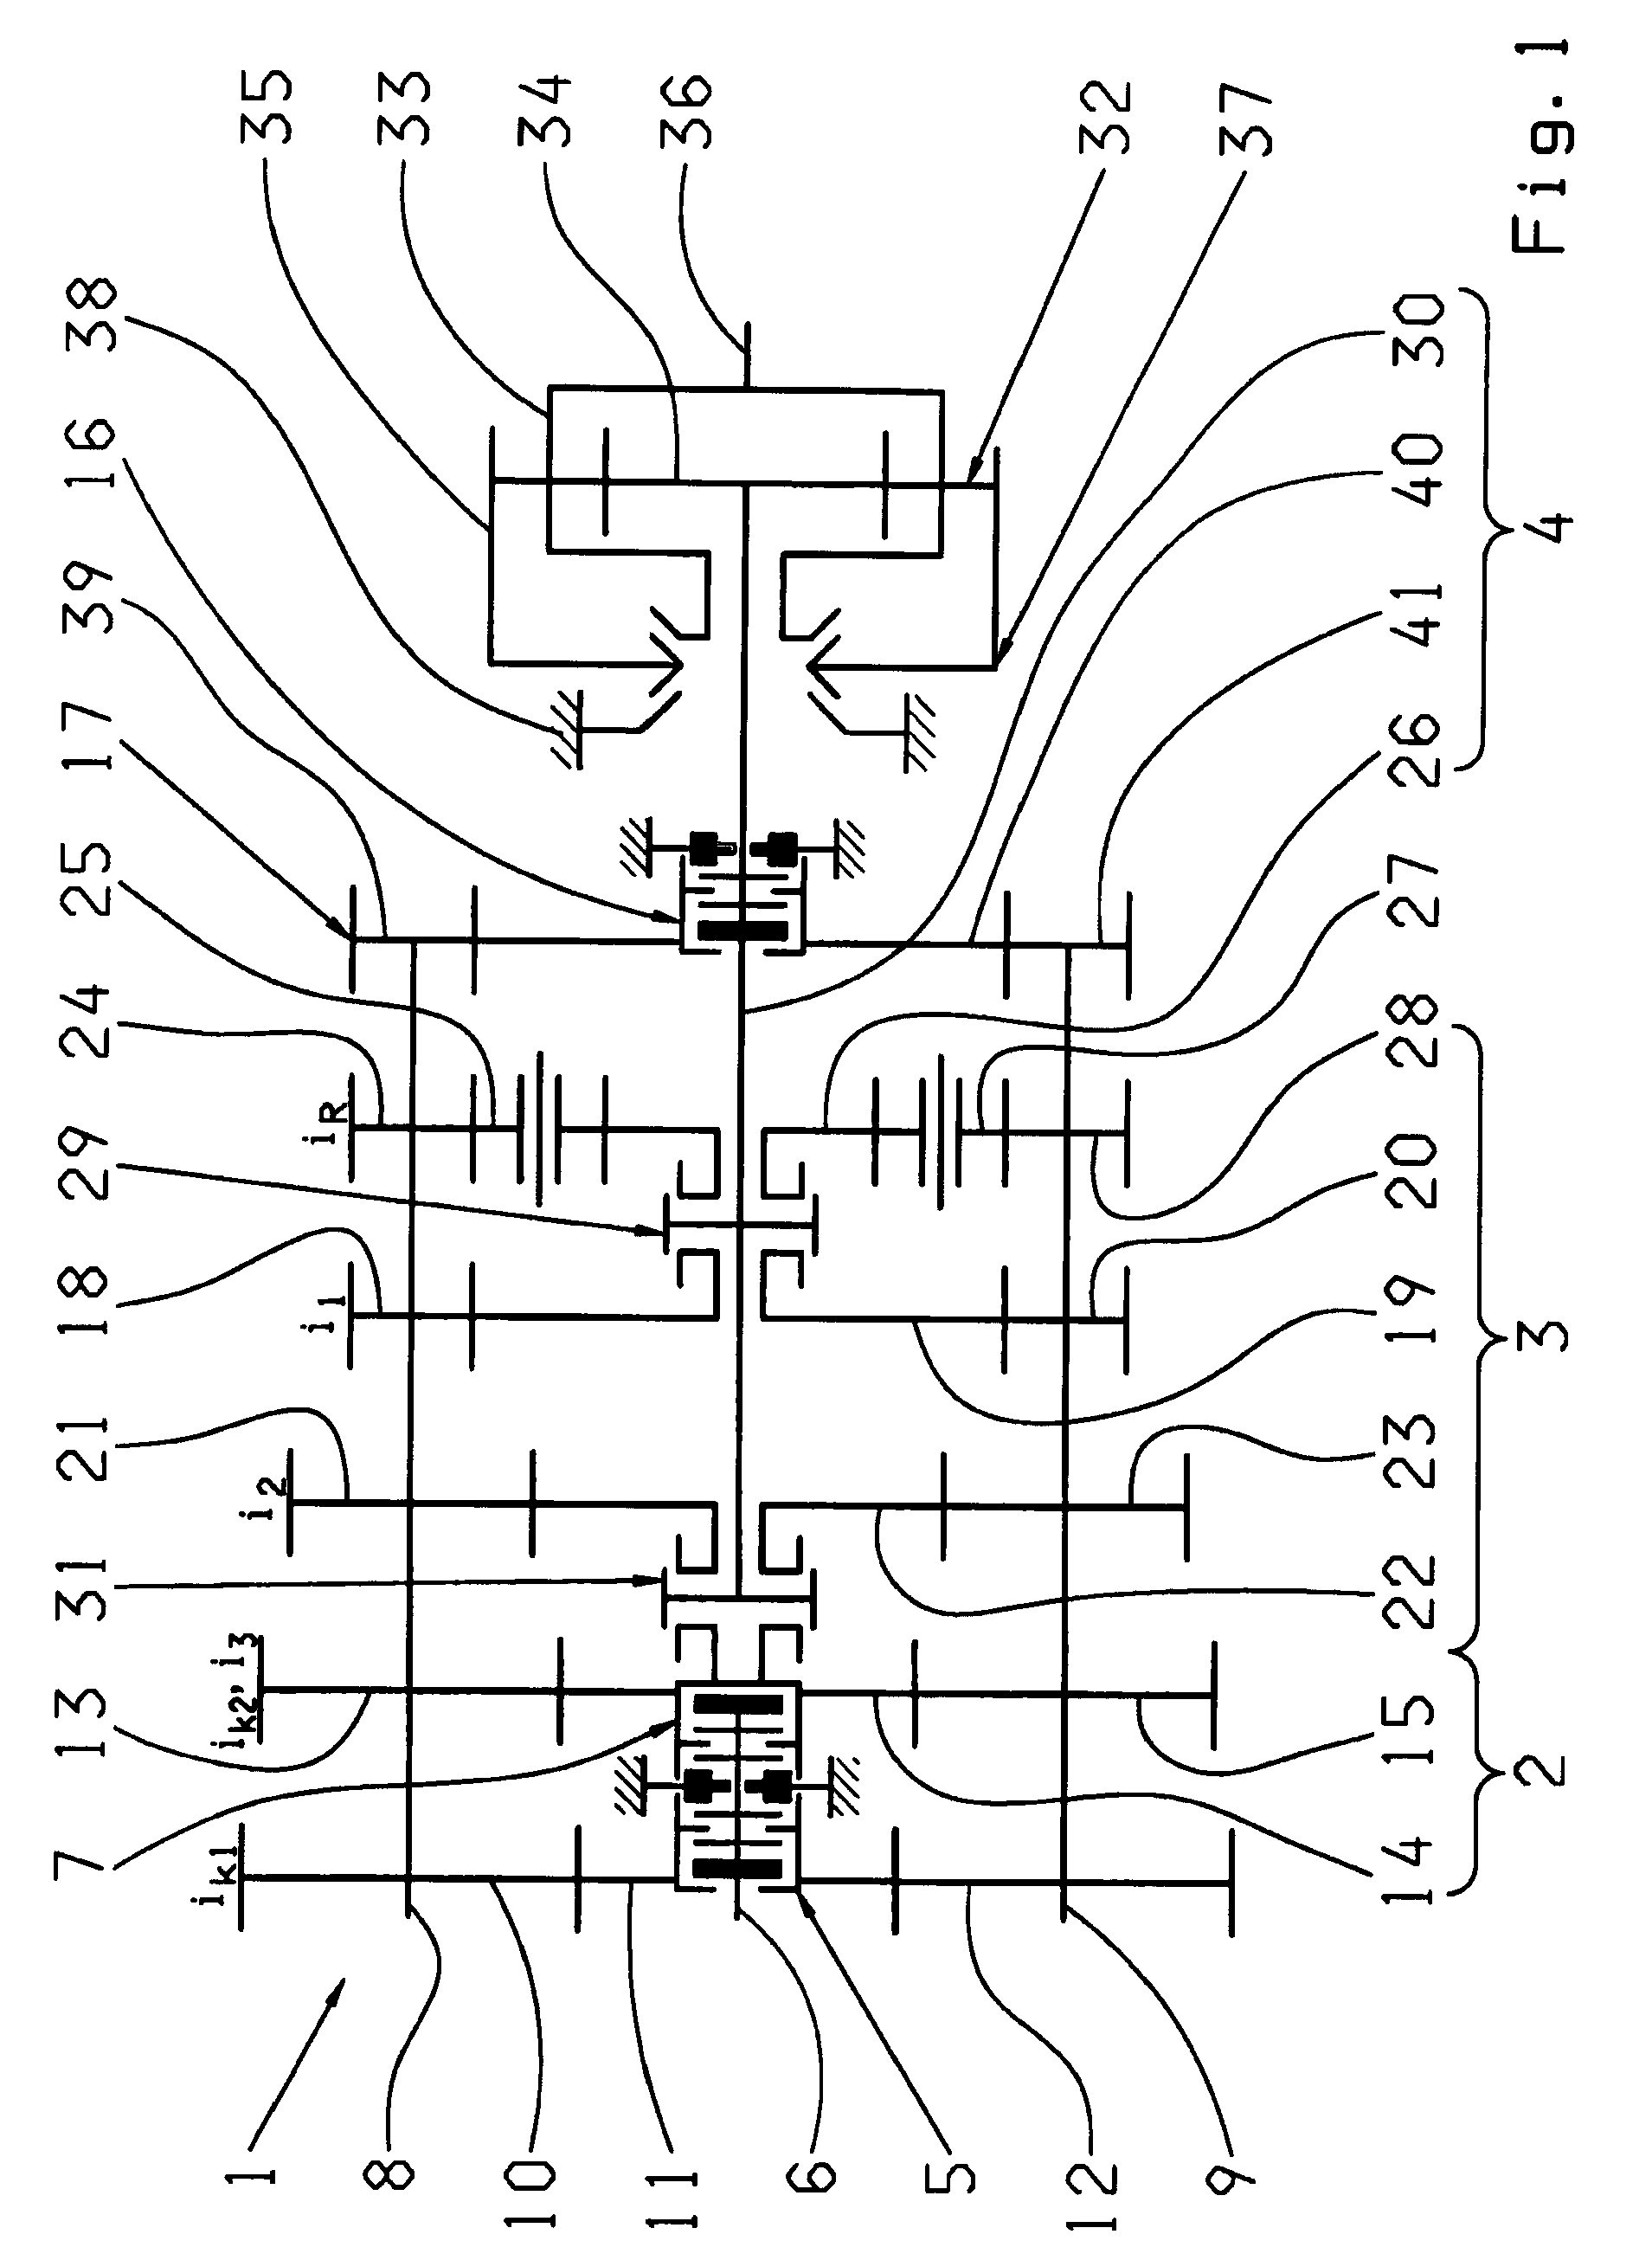 Multi-group transmission of a motor vehicle